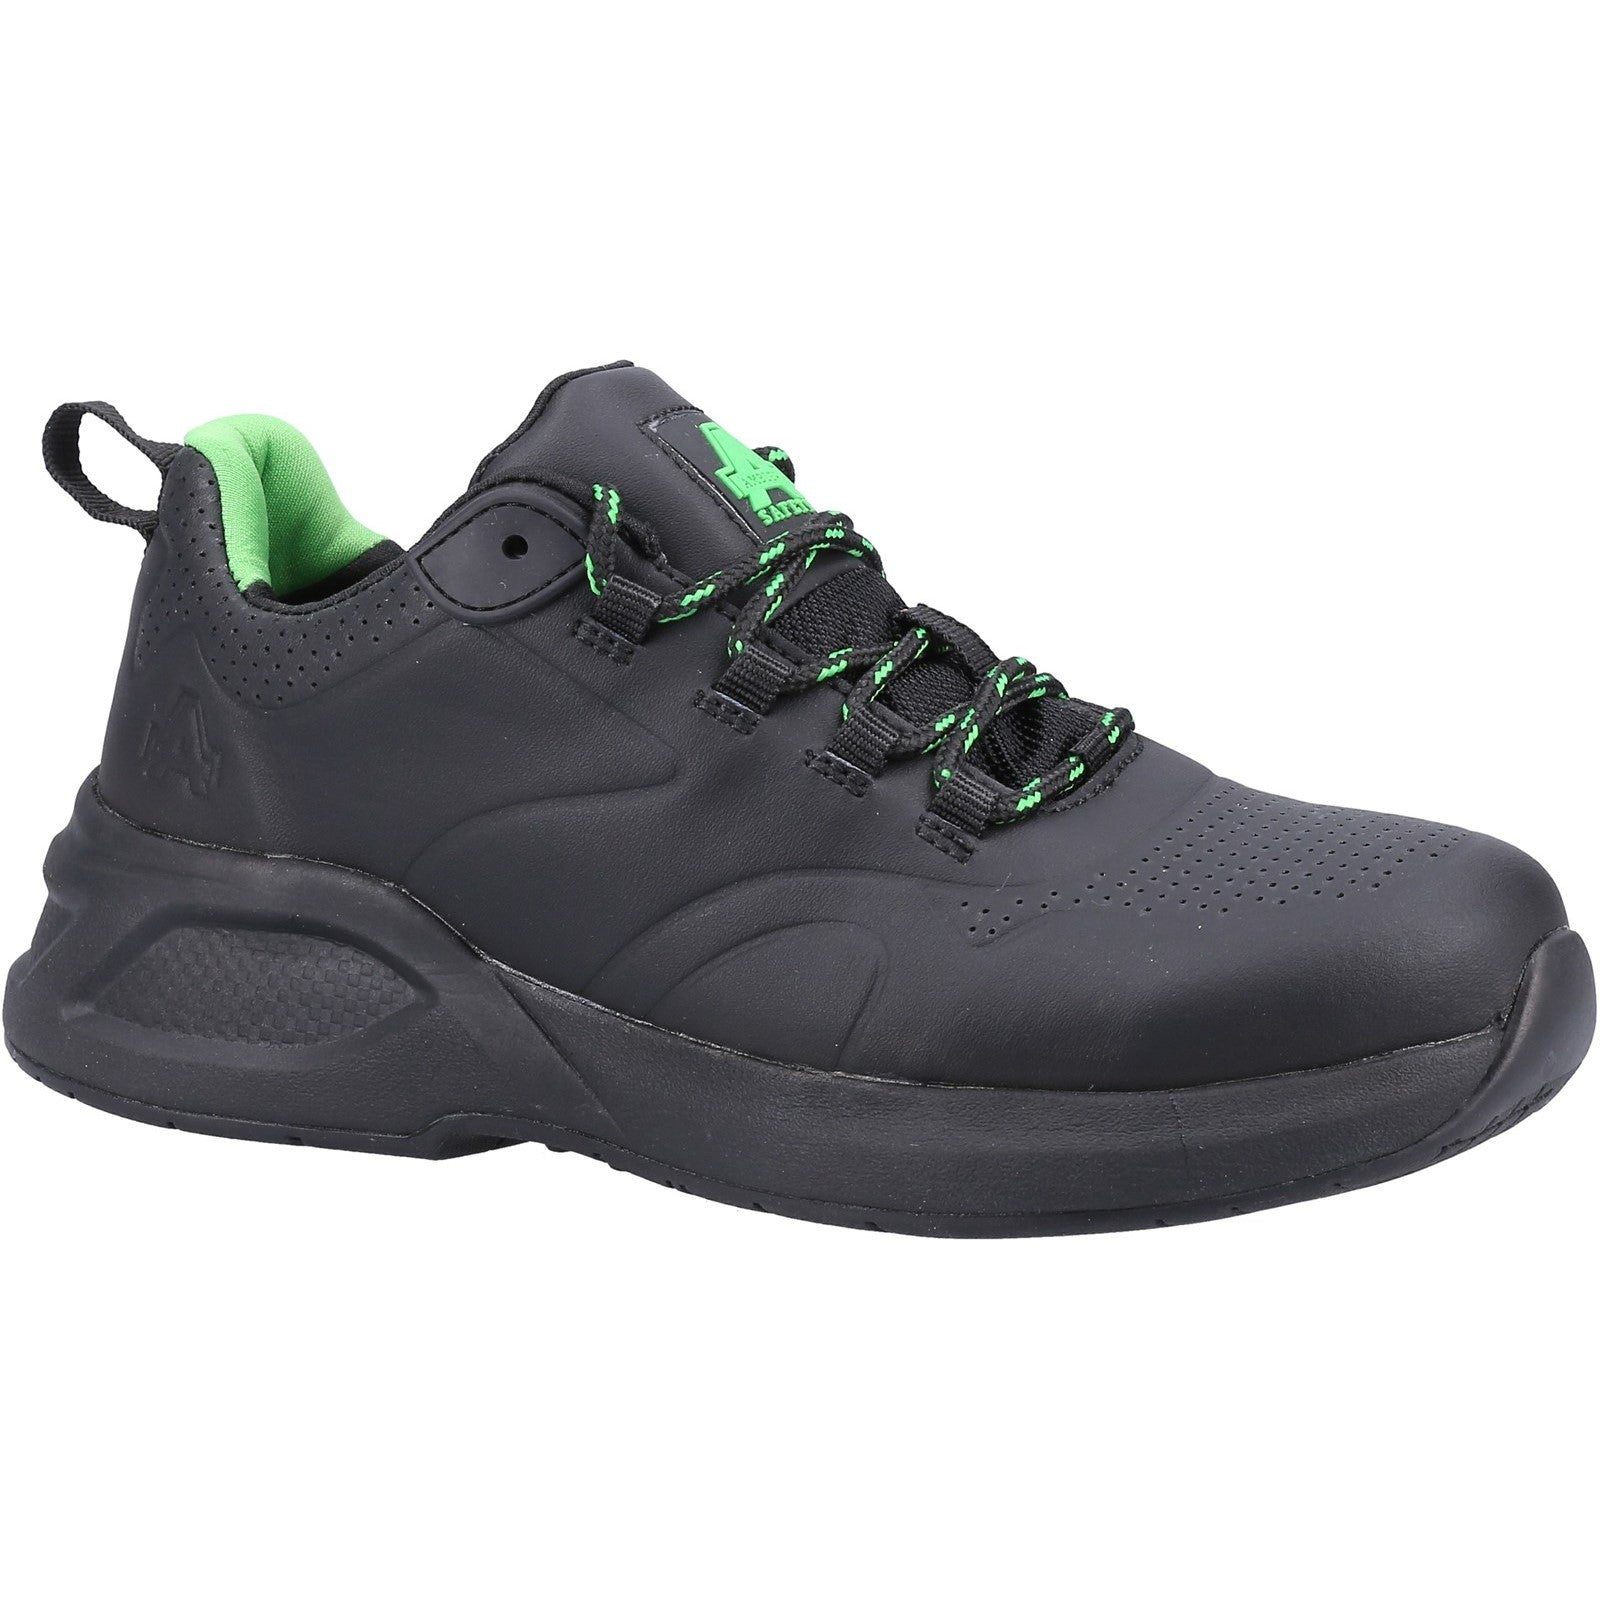 Amblers 612 Safety Trainers - Black